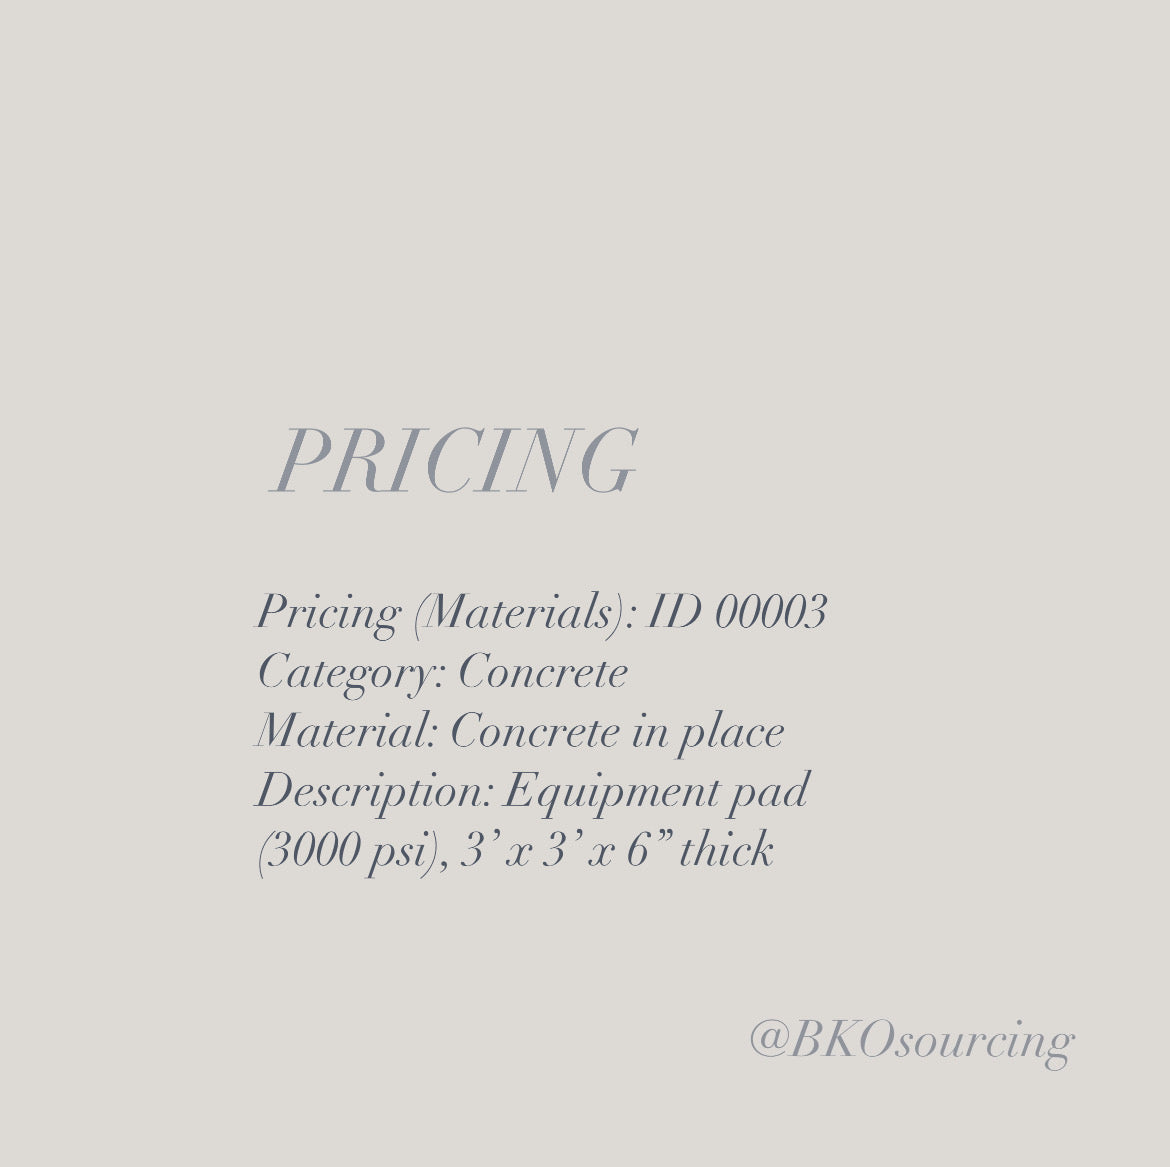 Pricing (Materials) 00003 - Concrete - Concrete in place - Equipment Pad 3’x3’x6” thick - 2023-16NOV - with crew details